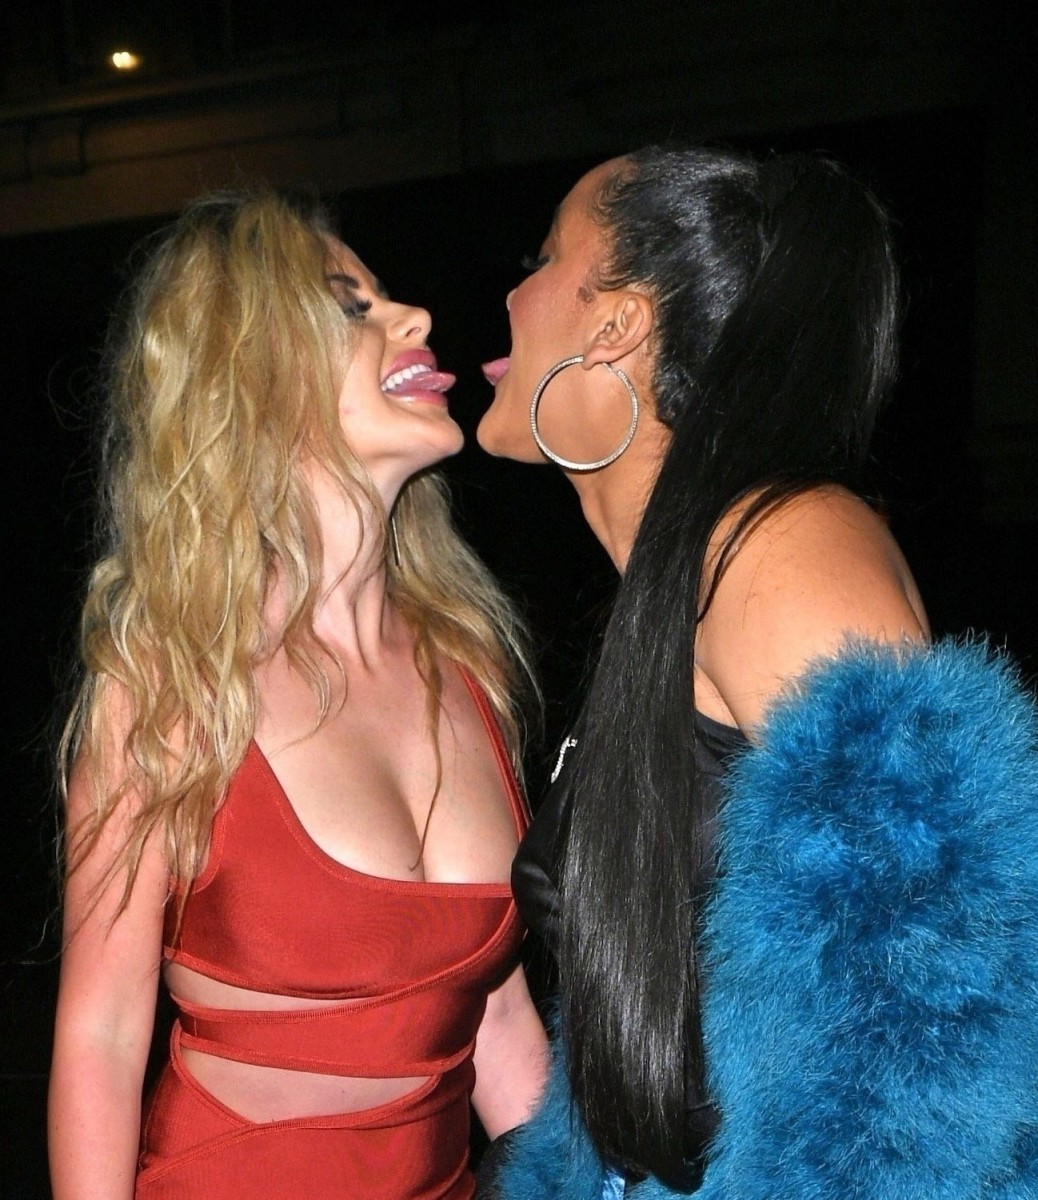 Chloe and Natalie kiss in the street on their wild night out in London last year